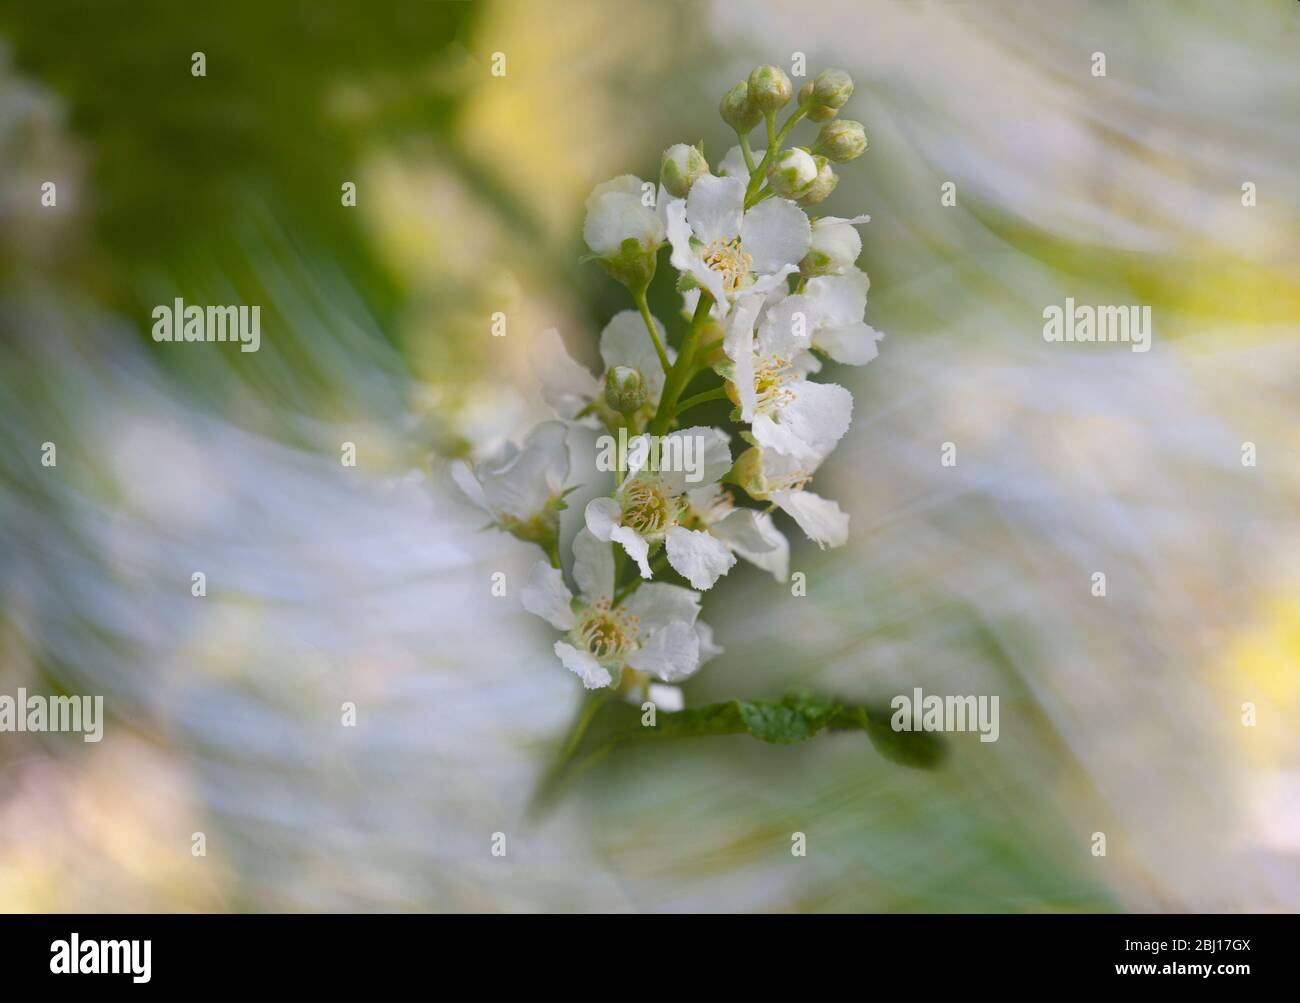 A Bird cherry's (Prunus padus) white blossom flowers moves in the wind with motion blur behind and the blossom in focus in the foreground. Stock Photo